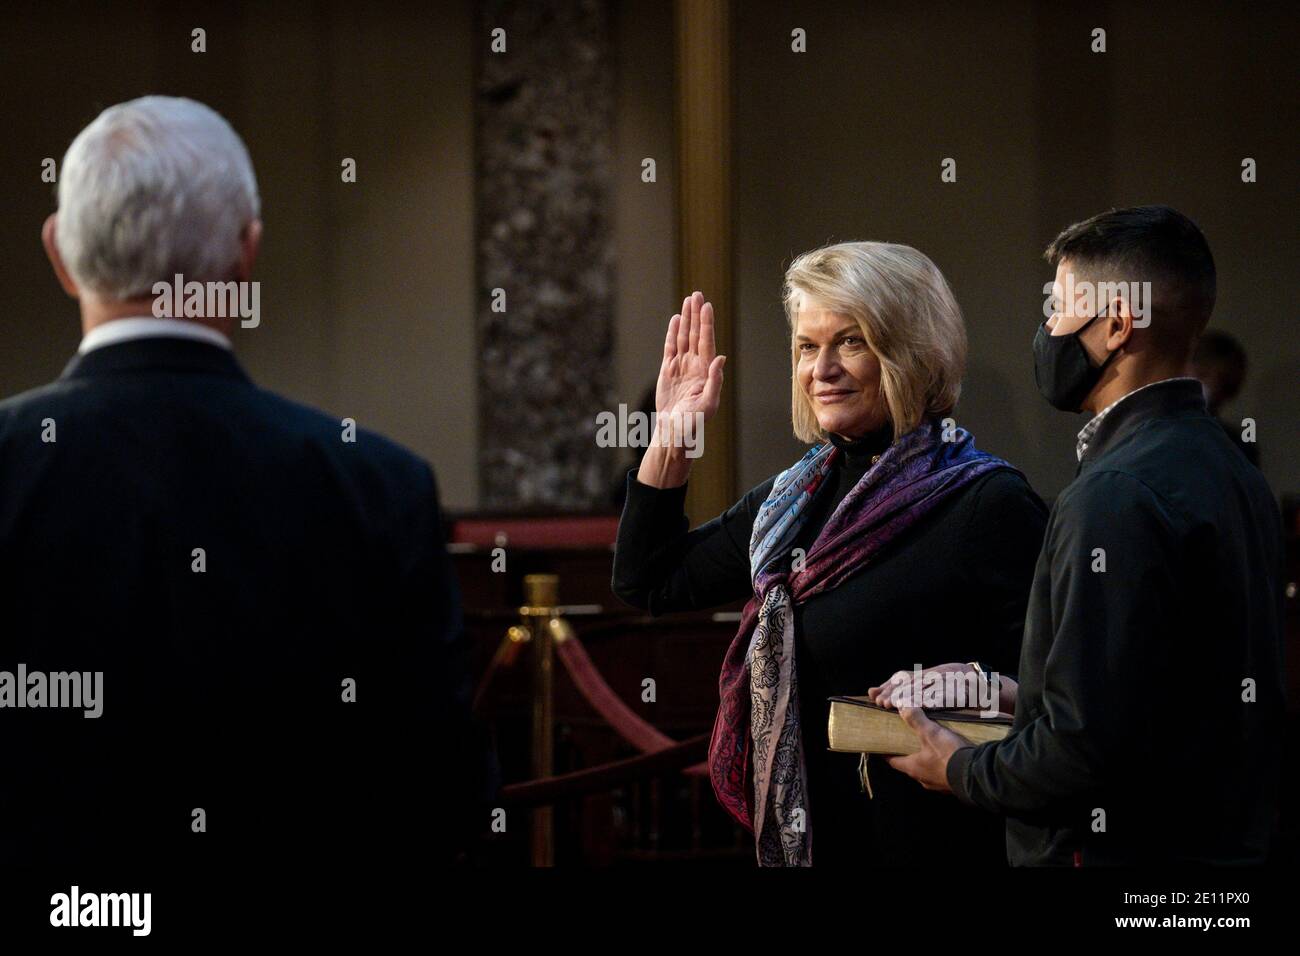 Washington, USA. 03rd Jan, 2021. Vice President Mike Pence administers the Senate oath of office to Cynthia Lummis (R-WY), during a mock swearing-in ceremony in the Old Senate Chamber on Capitol Hill on January 3, 2021 in Washington, DC. (Photo by Pete Marovich/Pool/Sipa USA) Credit: Sipa USA/Alamy Live News Stock Photo